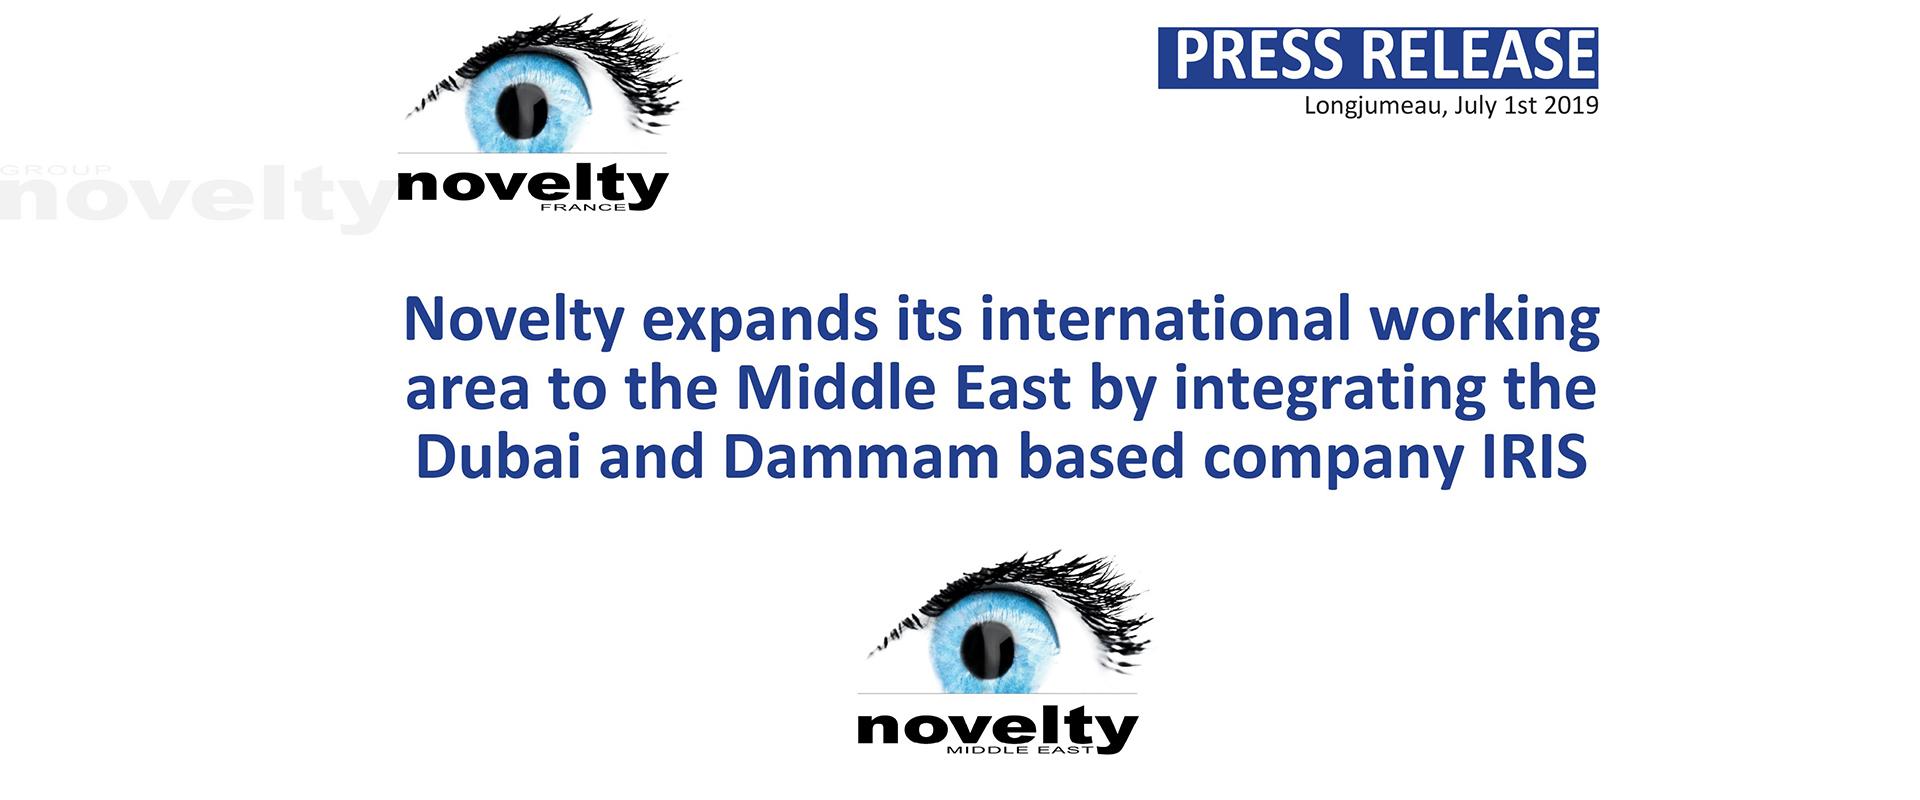 Visuel Novelty expands its international working area to the Middle East by integrating the Dubai and Dammam based company IRIS